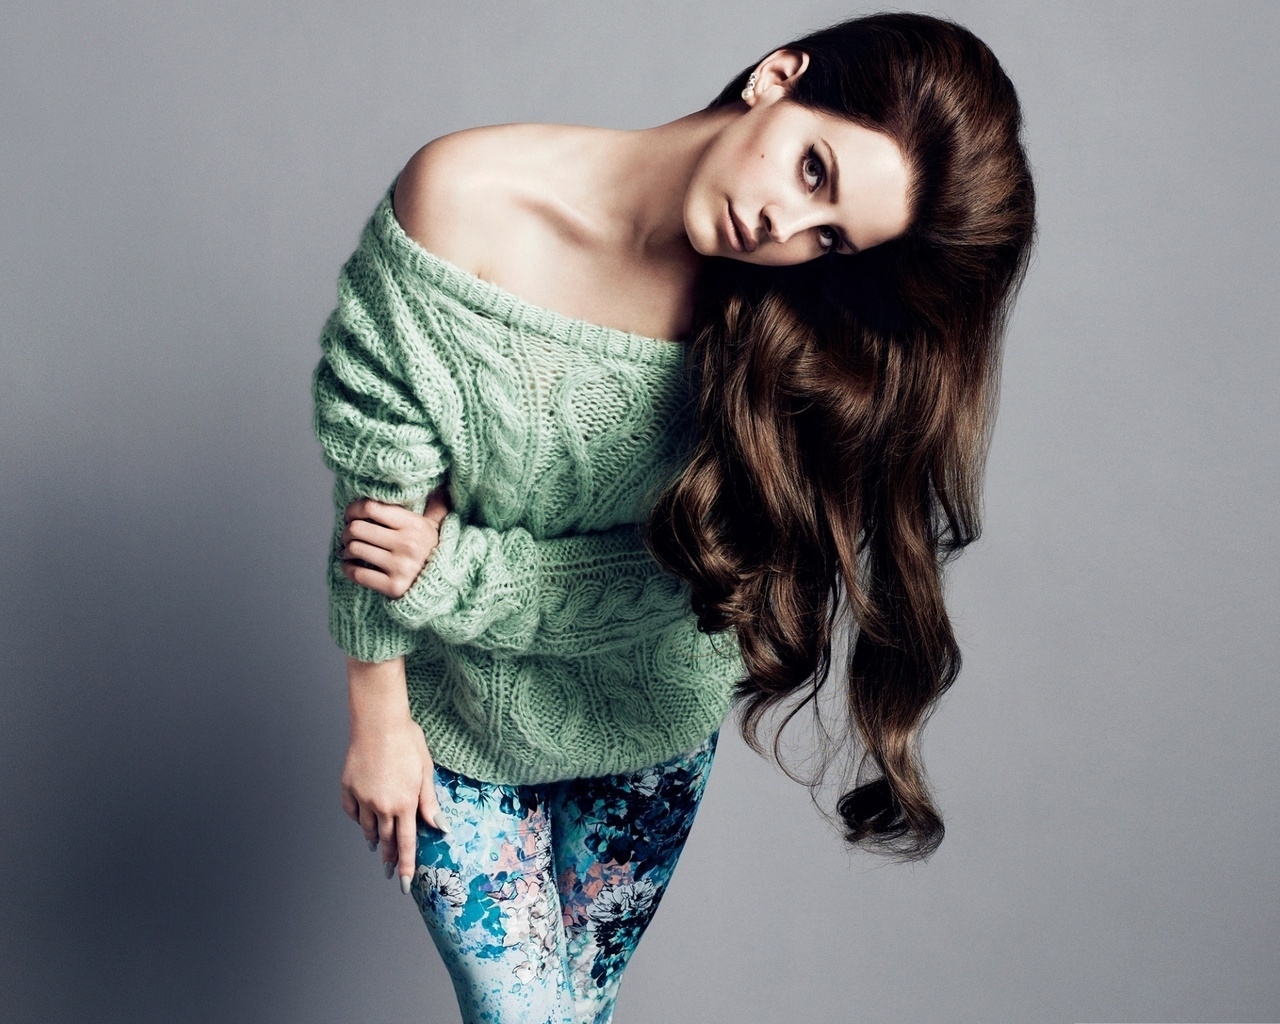 Lana Del Rey Hair Style for 1280 x 1024 resolution